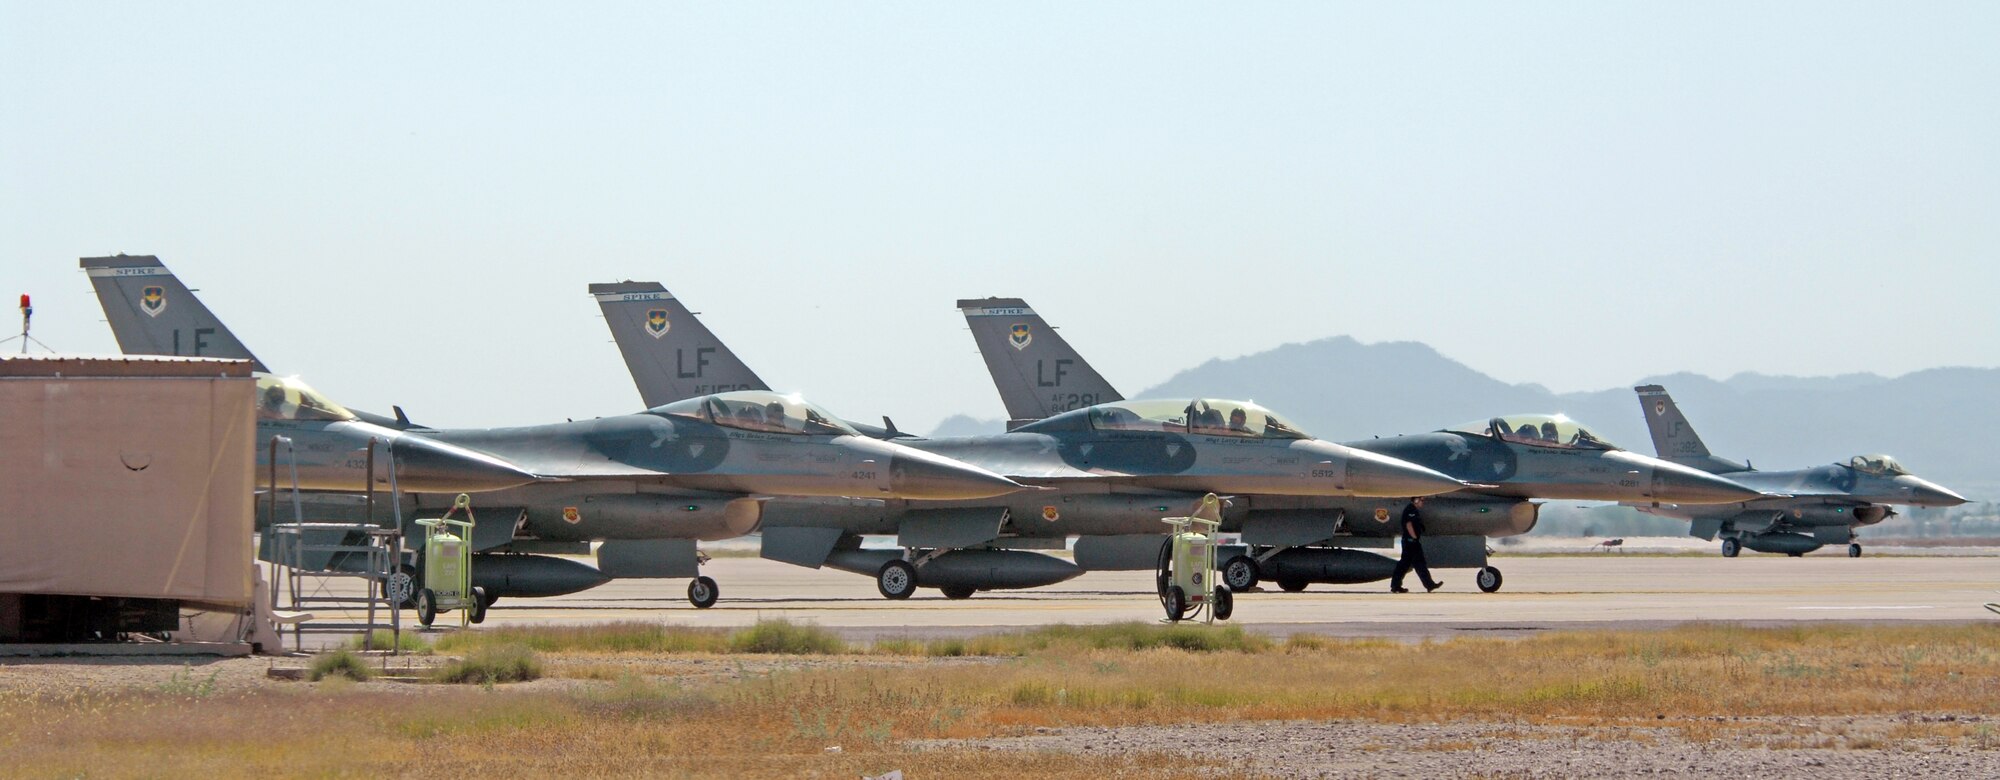 F-16's from the 62nd Fighter Squadron await take-off orders at the north end of runway on April 29. at Luke Air Force Base, Ariz.
U.S. Air Force photo by Tech. Sgt. Raheem Moore